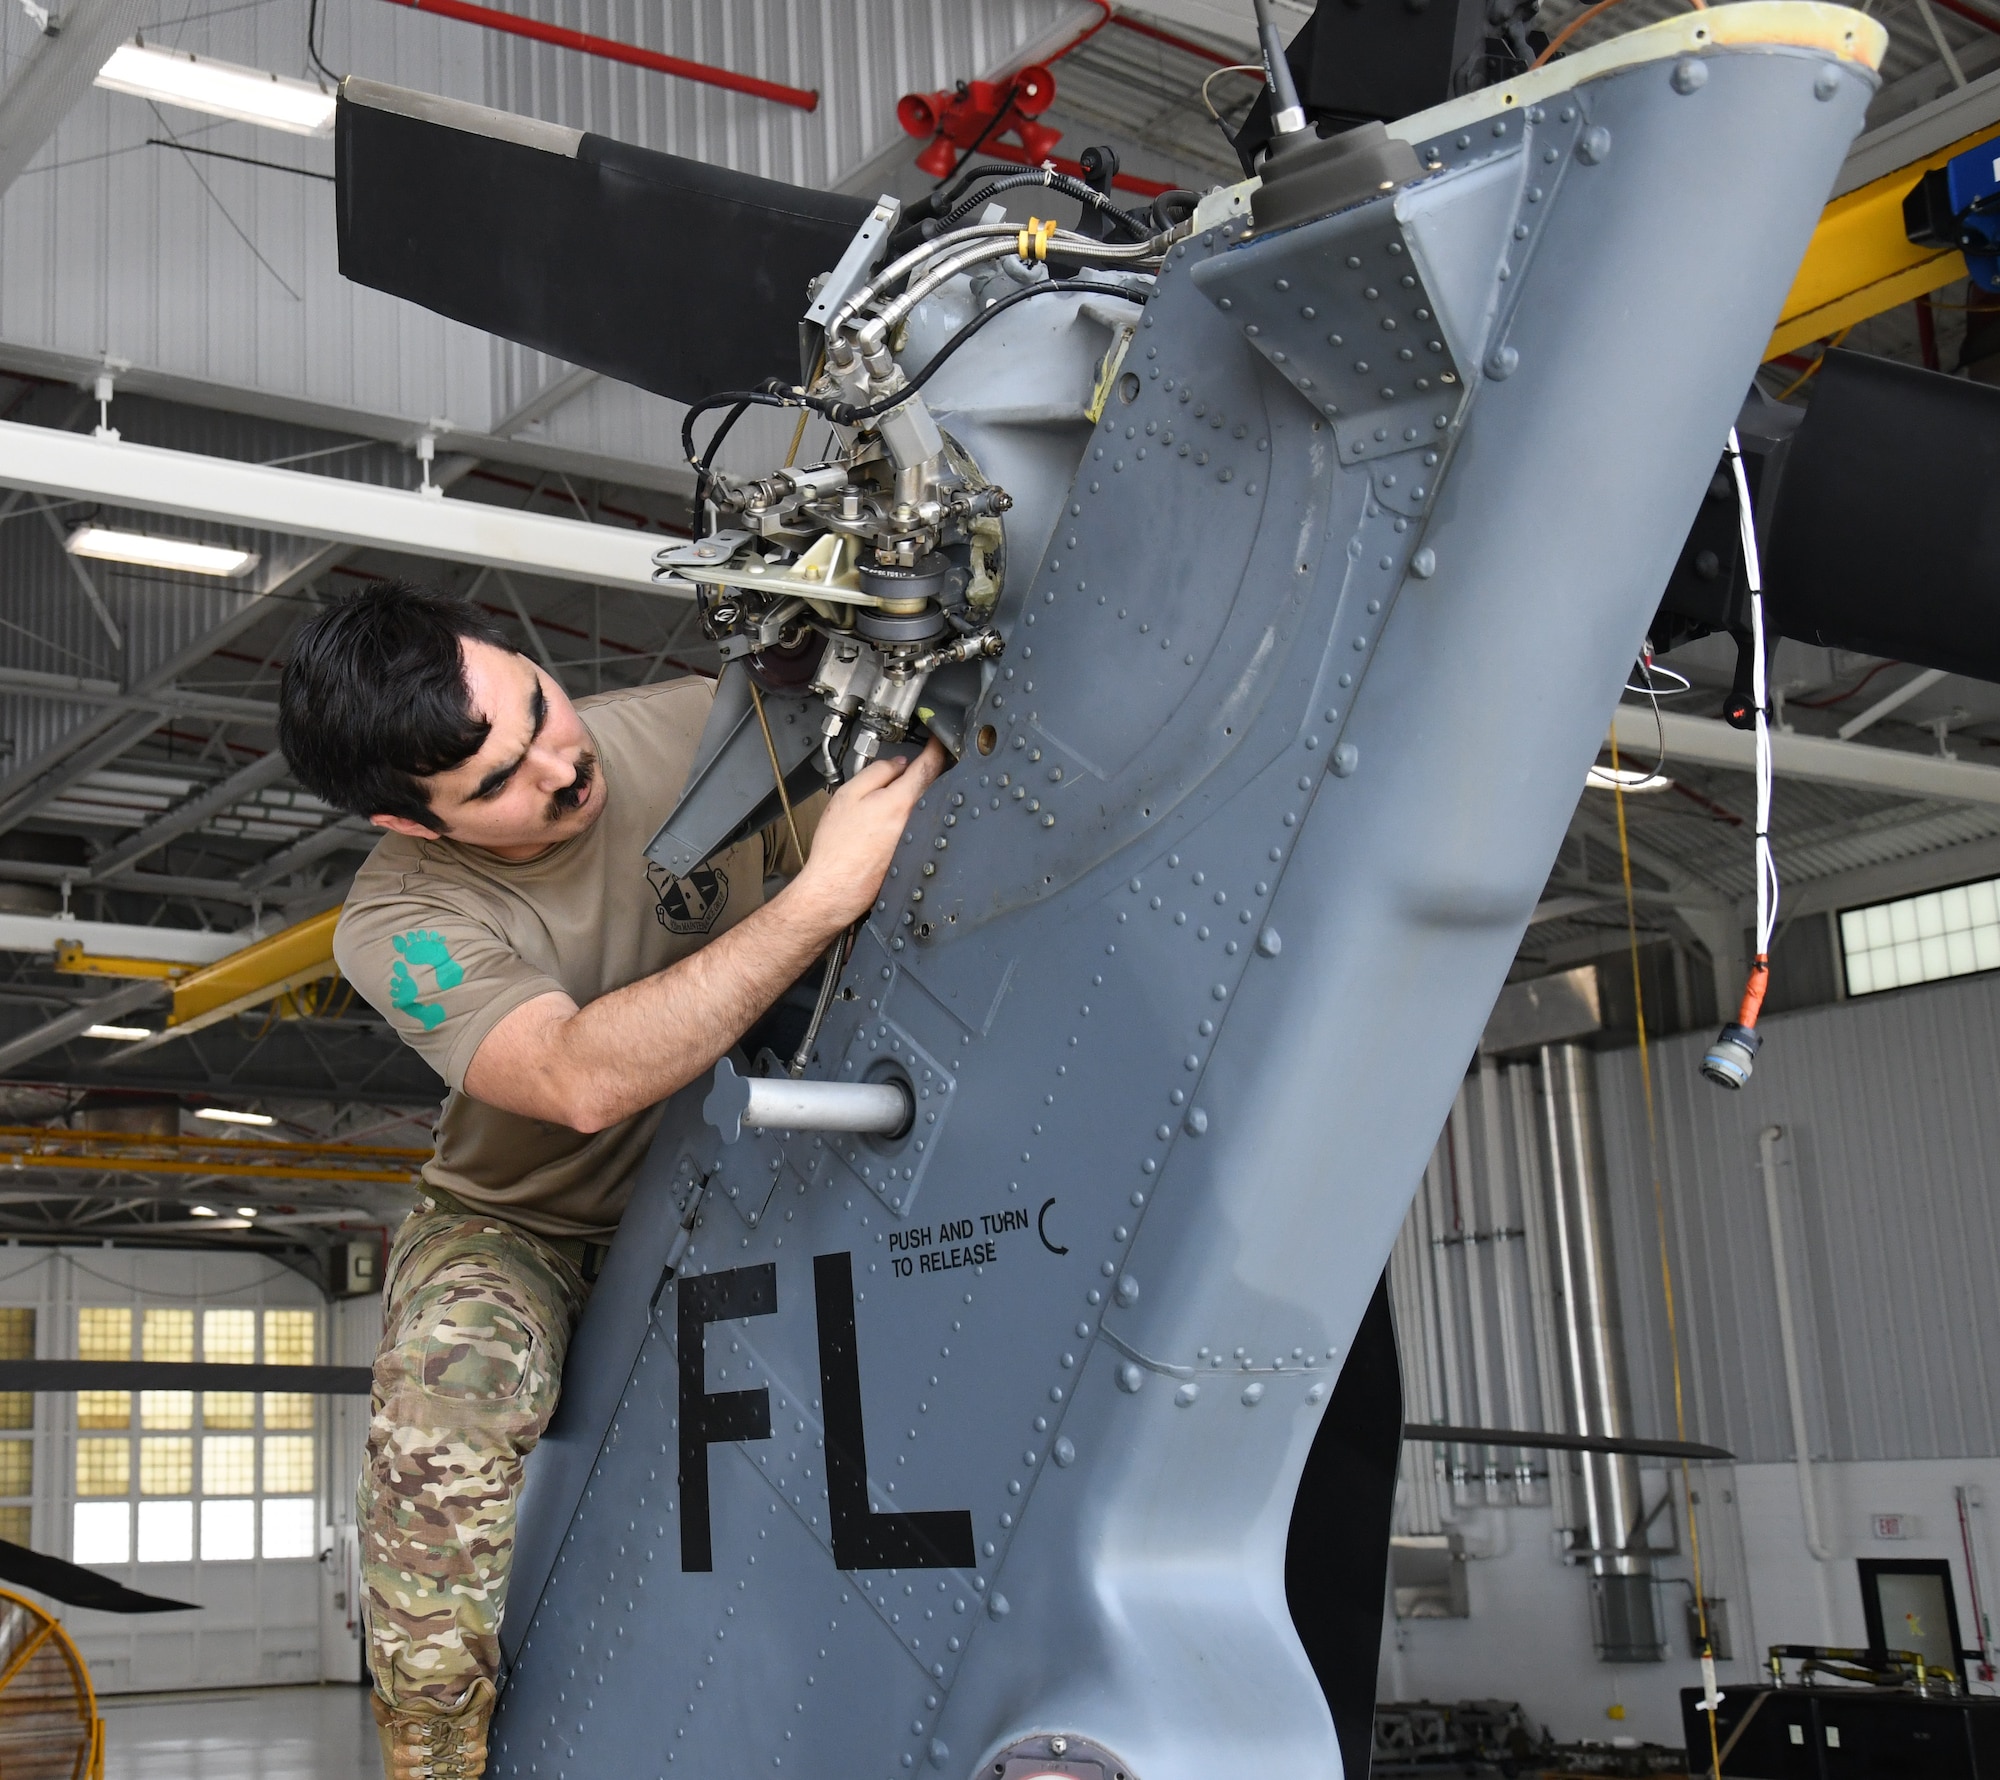 Staff Sgt. Victor DiTanna, 920th Maintenance Squadron maintainer, prepares the tail section for a drive shaft replacement on a HH-60G Pave Hawk at Patrick Space Force Base, Florida, June 30, 2022. The 920th MXS preforms phase inspections to ensure the HH-60G Pave Hawks preform safely and effectively. (U.S. Air Force photo by Staff Sgt. Darius Sostre-Miroir)